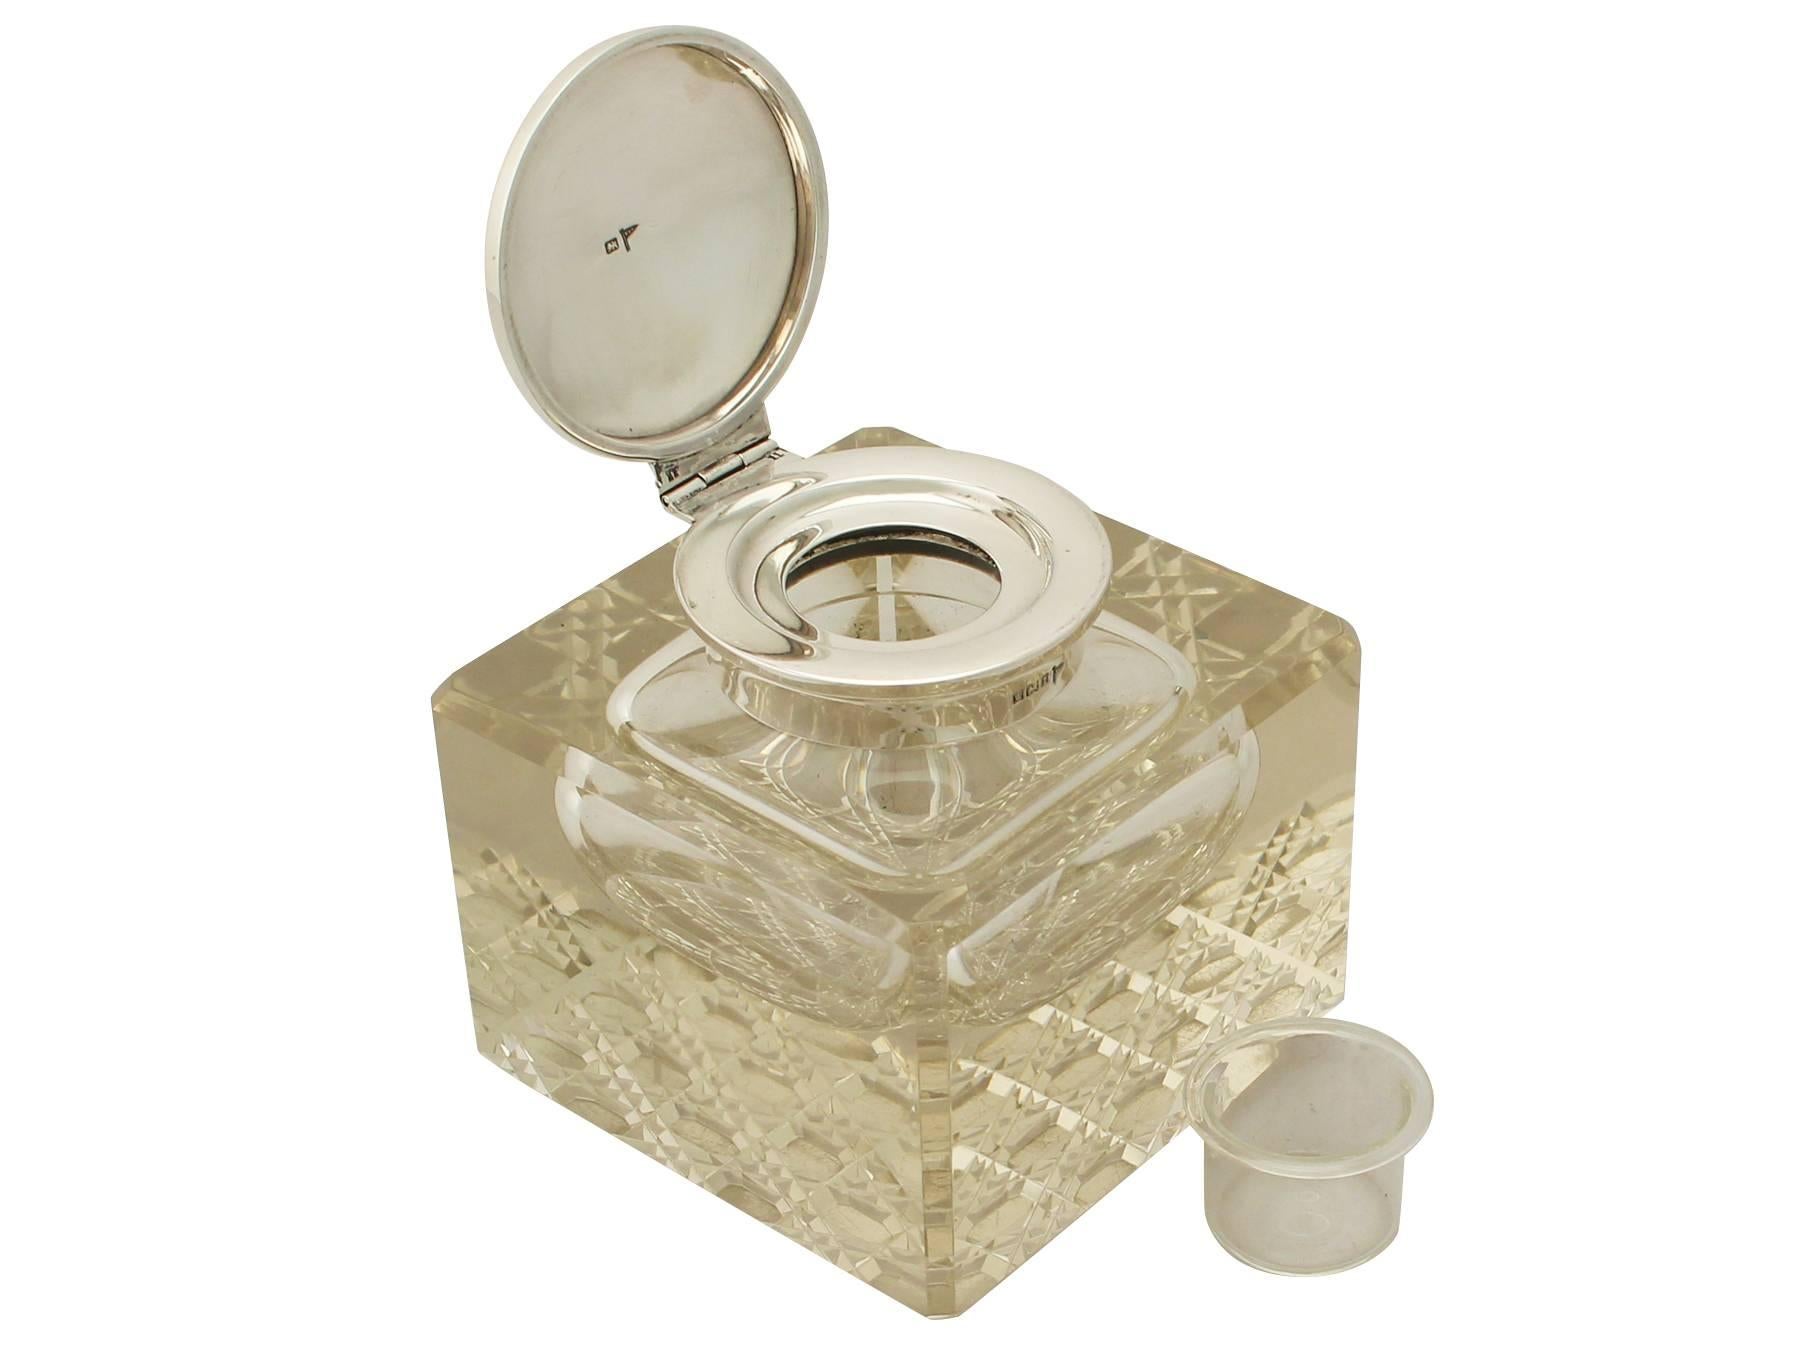 Early 20th Century Antique 1910s Champagne Colored Cut Glass and Sterling Silver Desk Inkwell